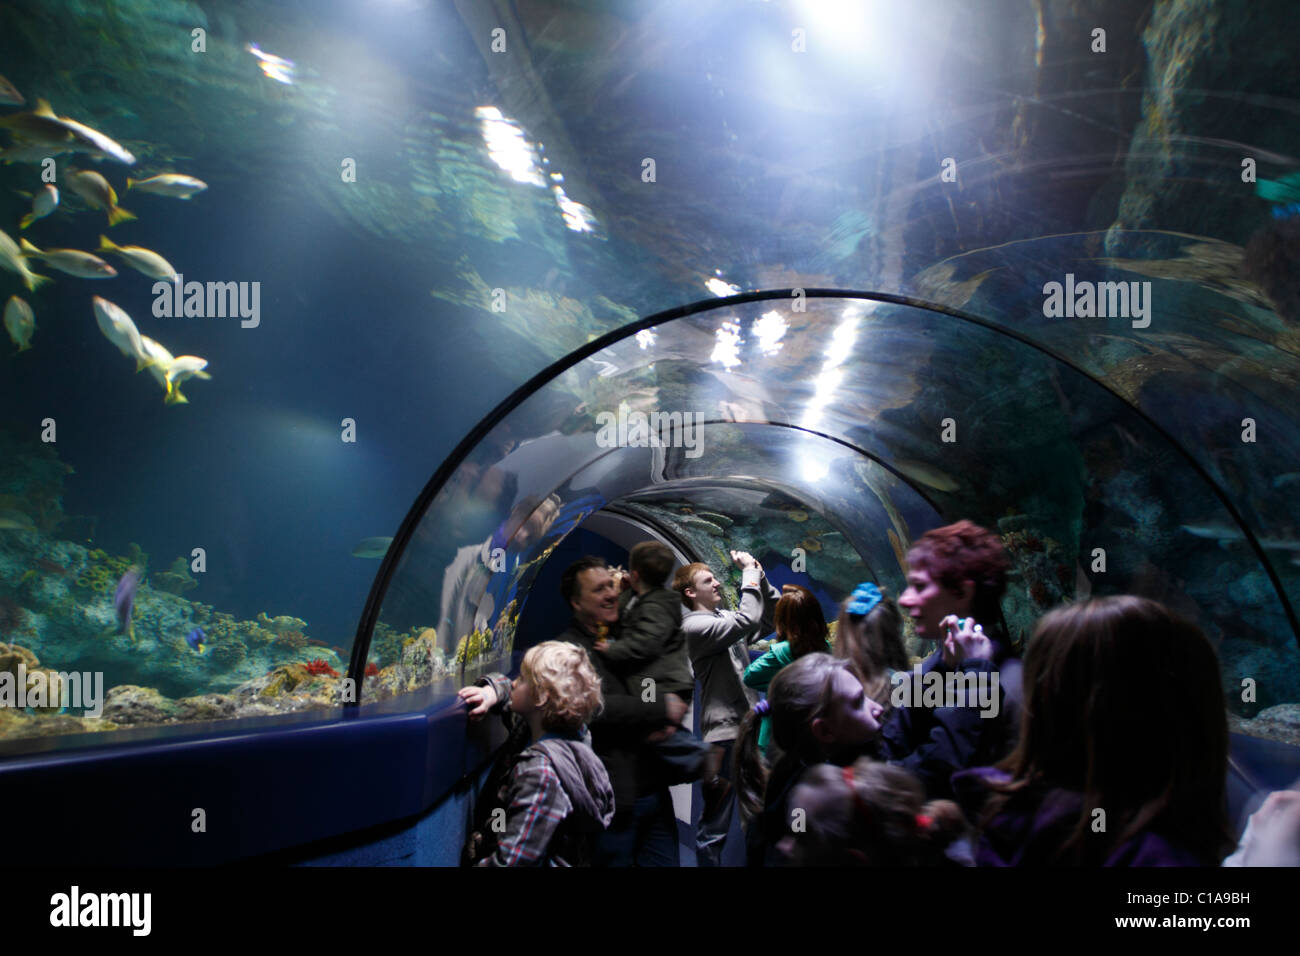 Aquarium tunnel with people viewing and photographing fish Stock Photo